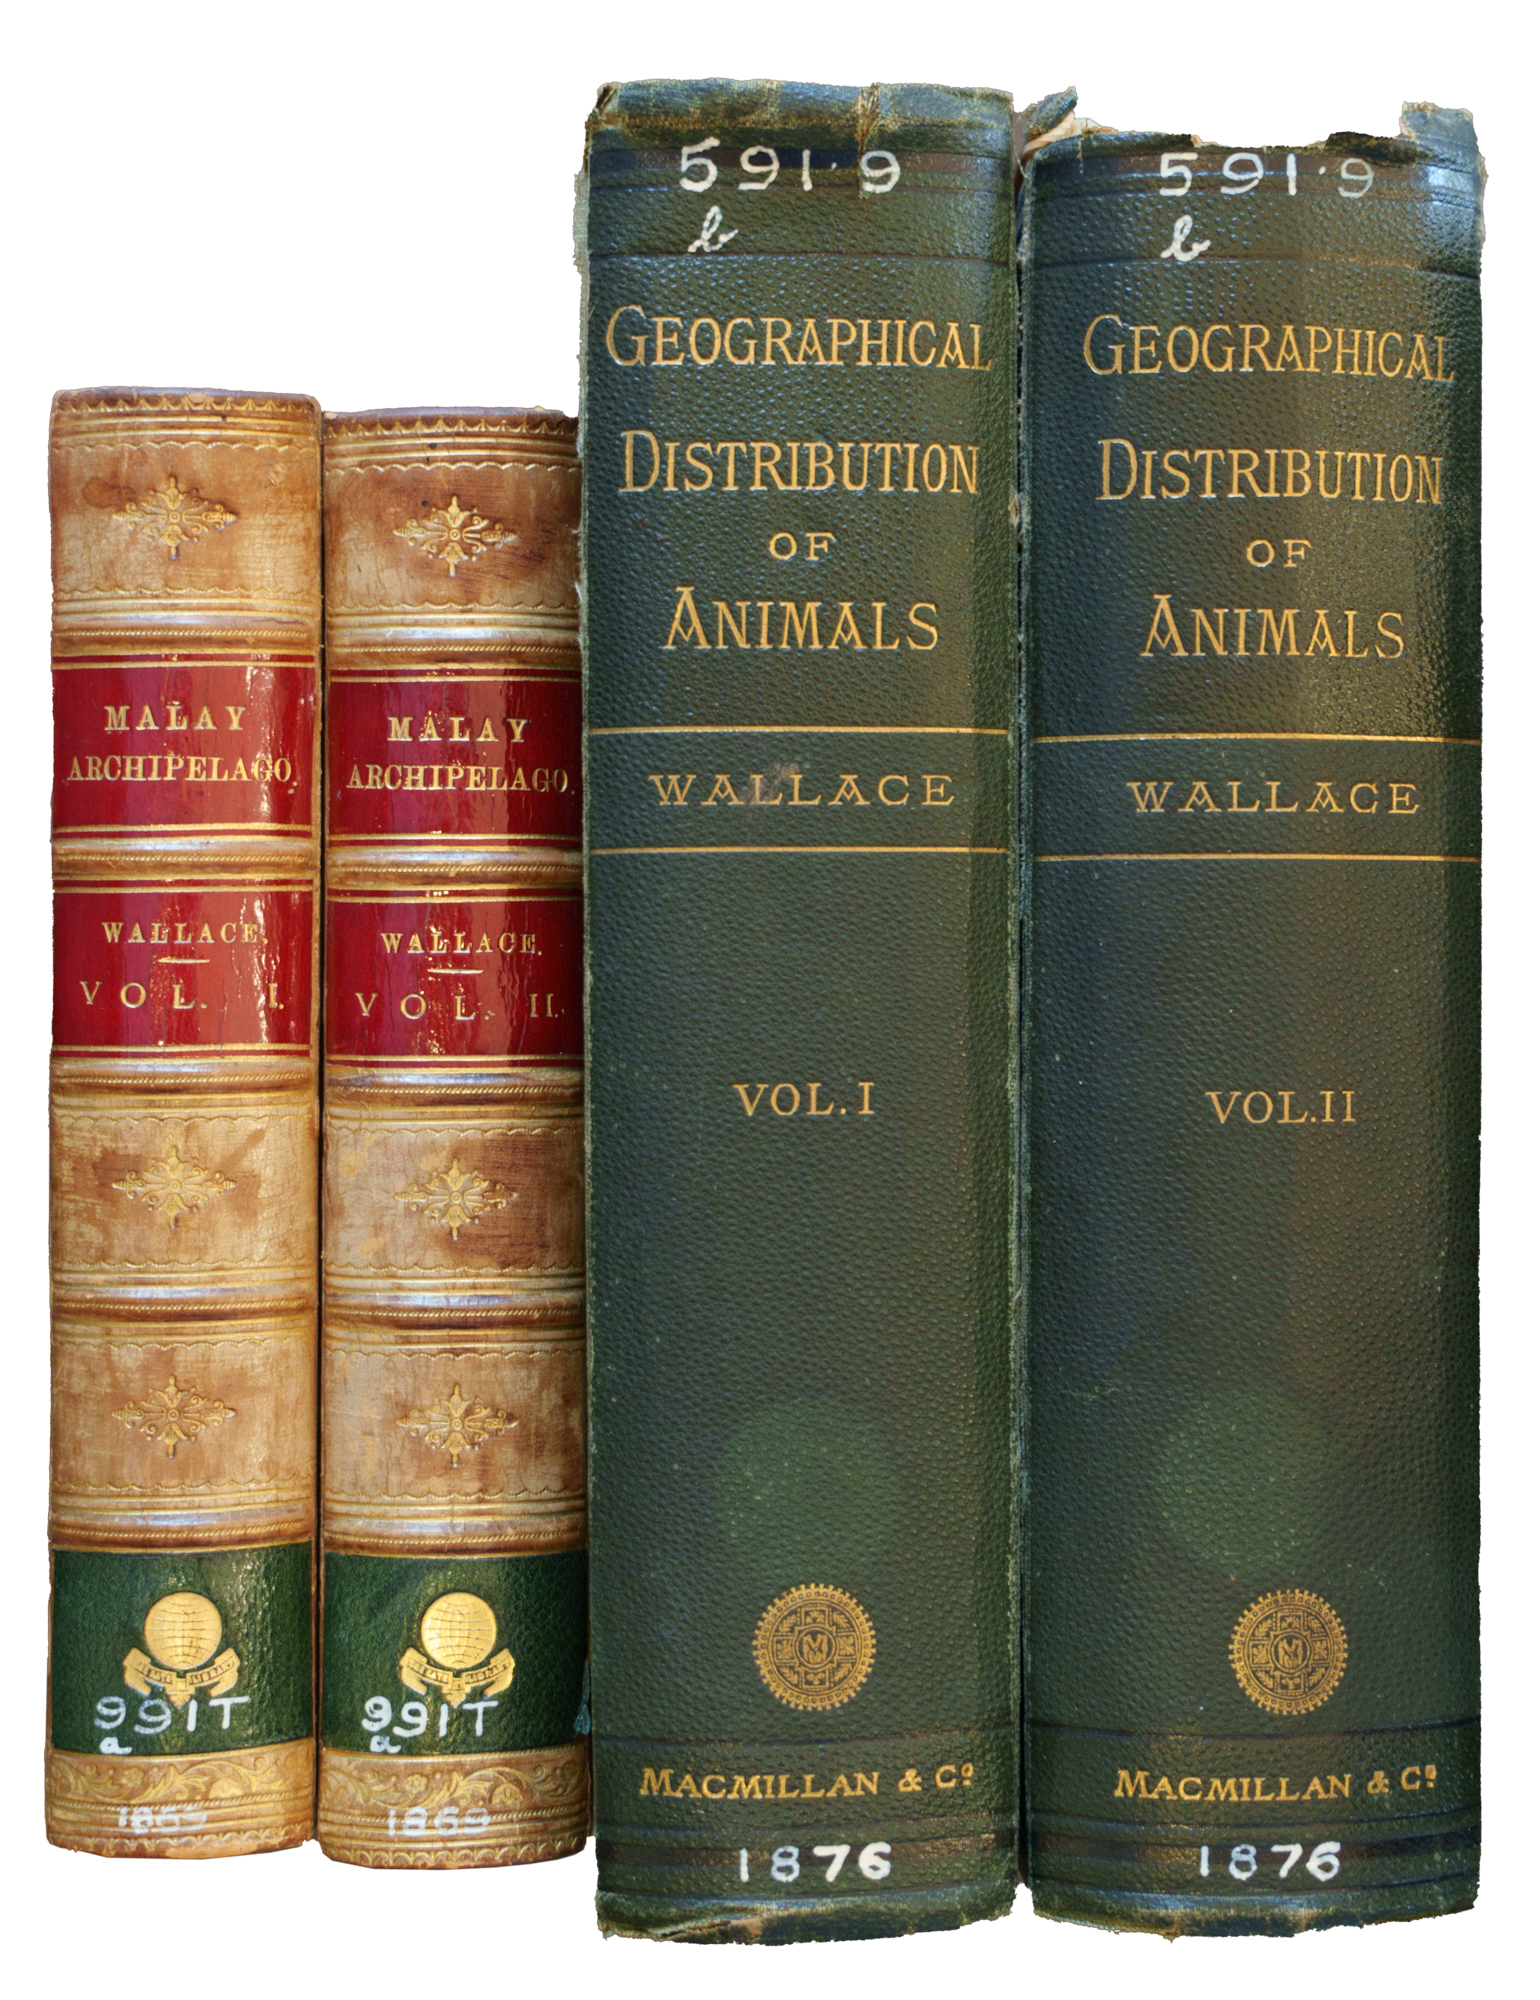 Wallace volumes